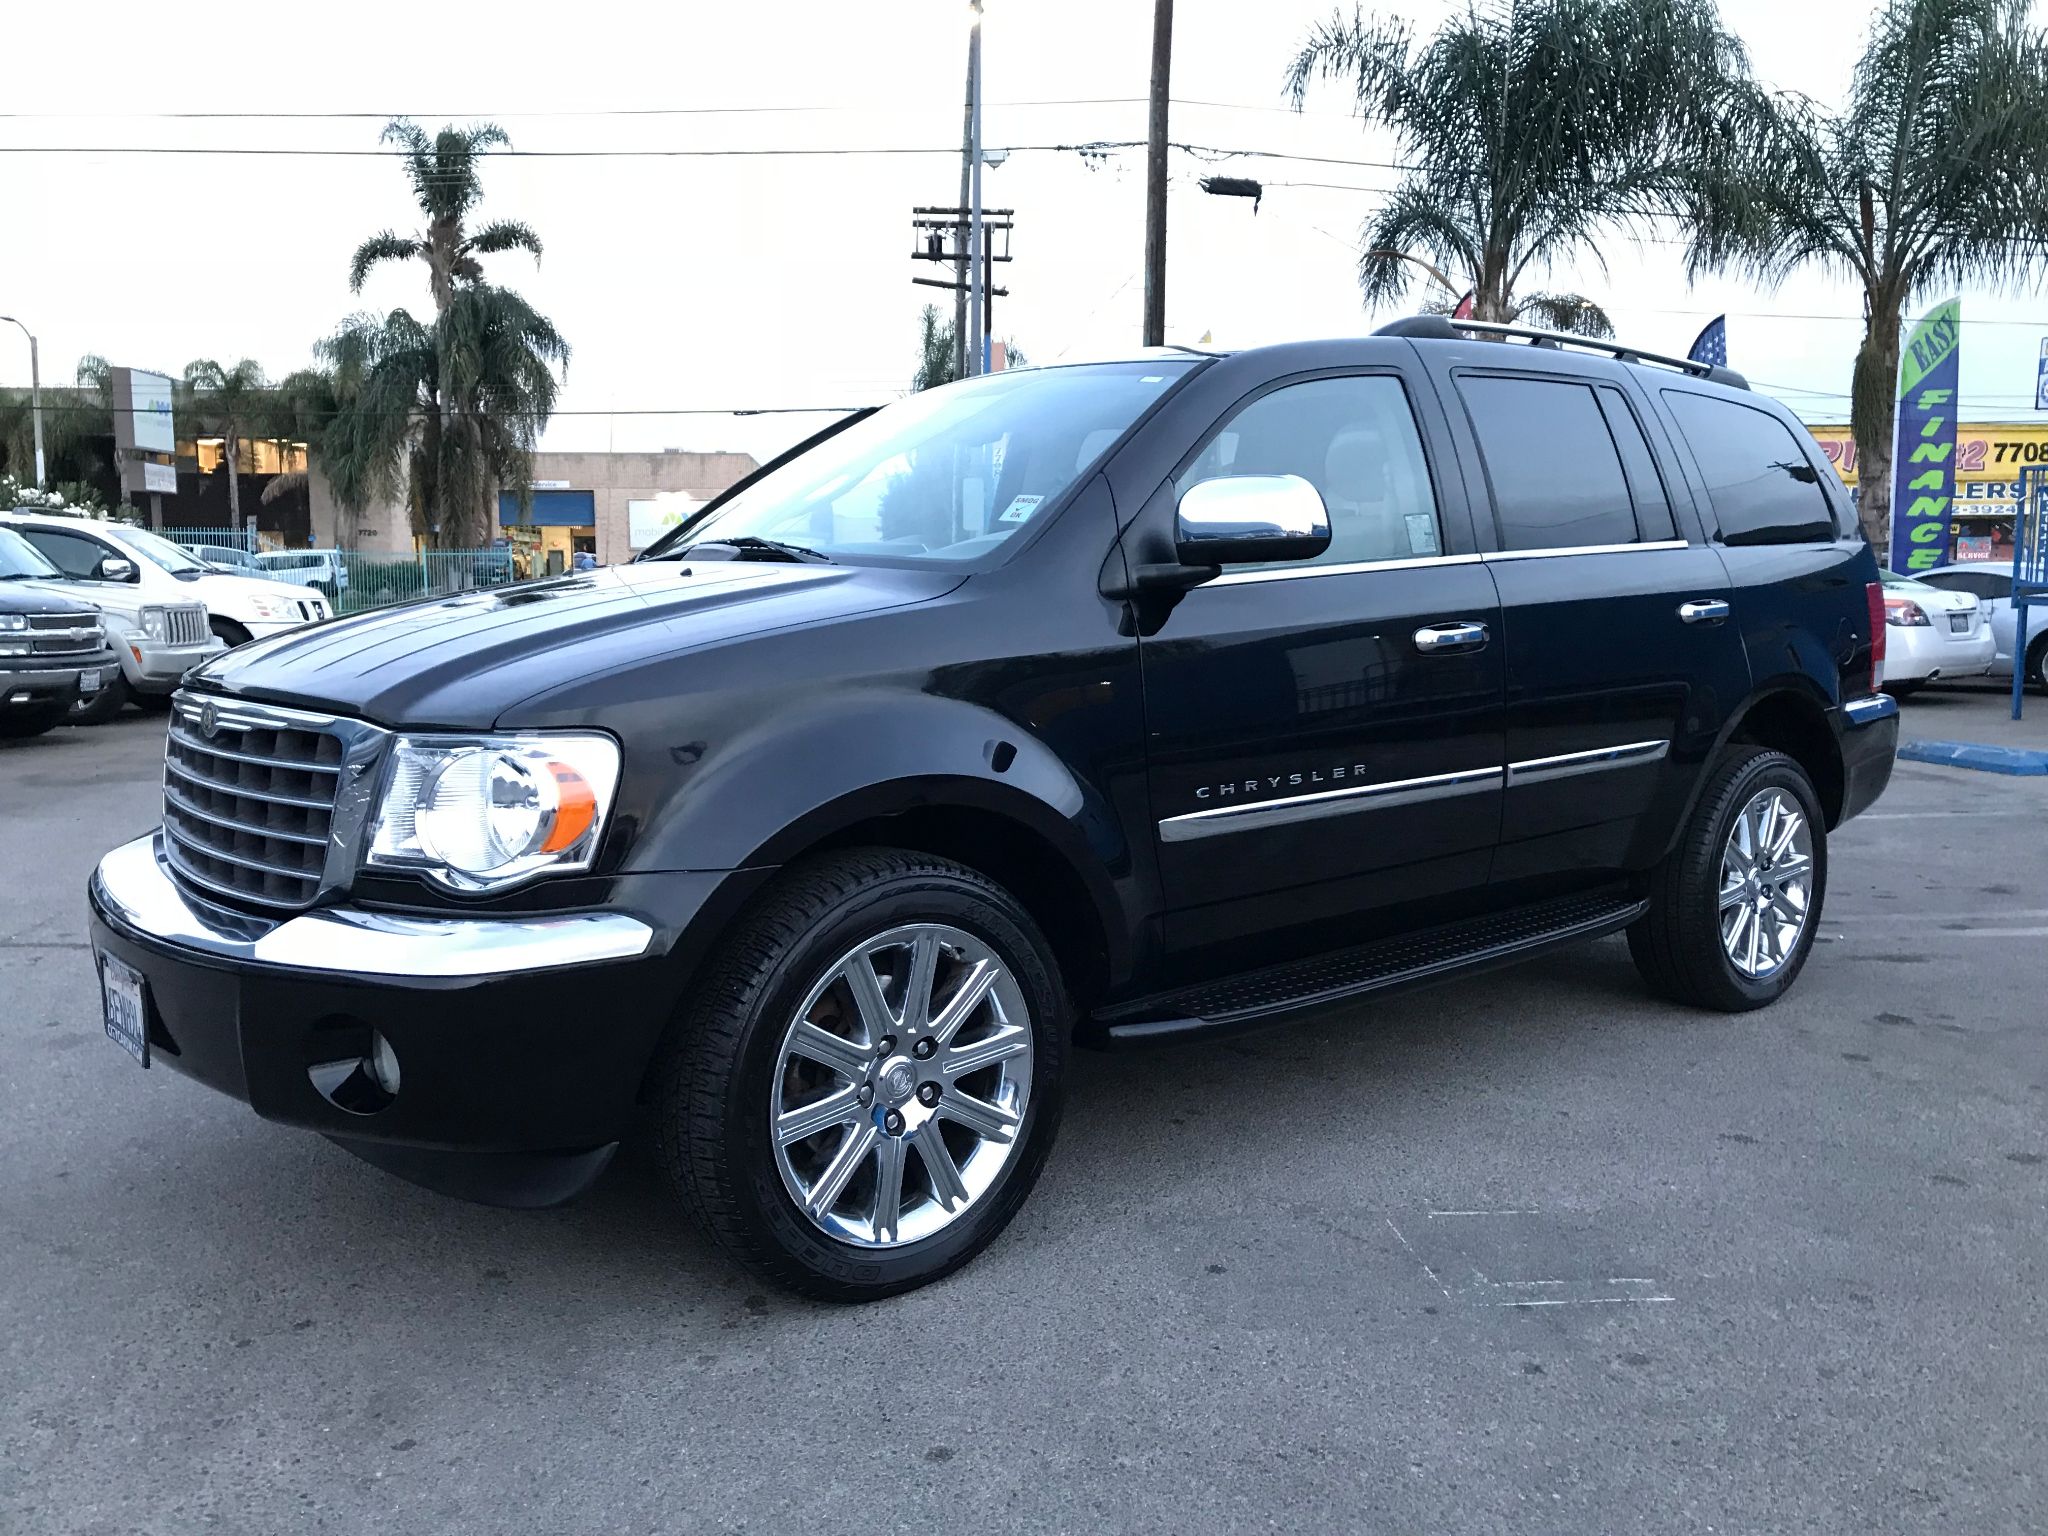 Used 2008 Chrysler Aspen Limited at City Cars Warehouse Inc